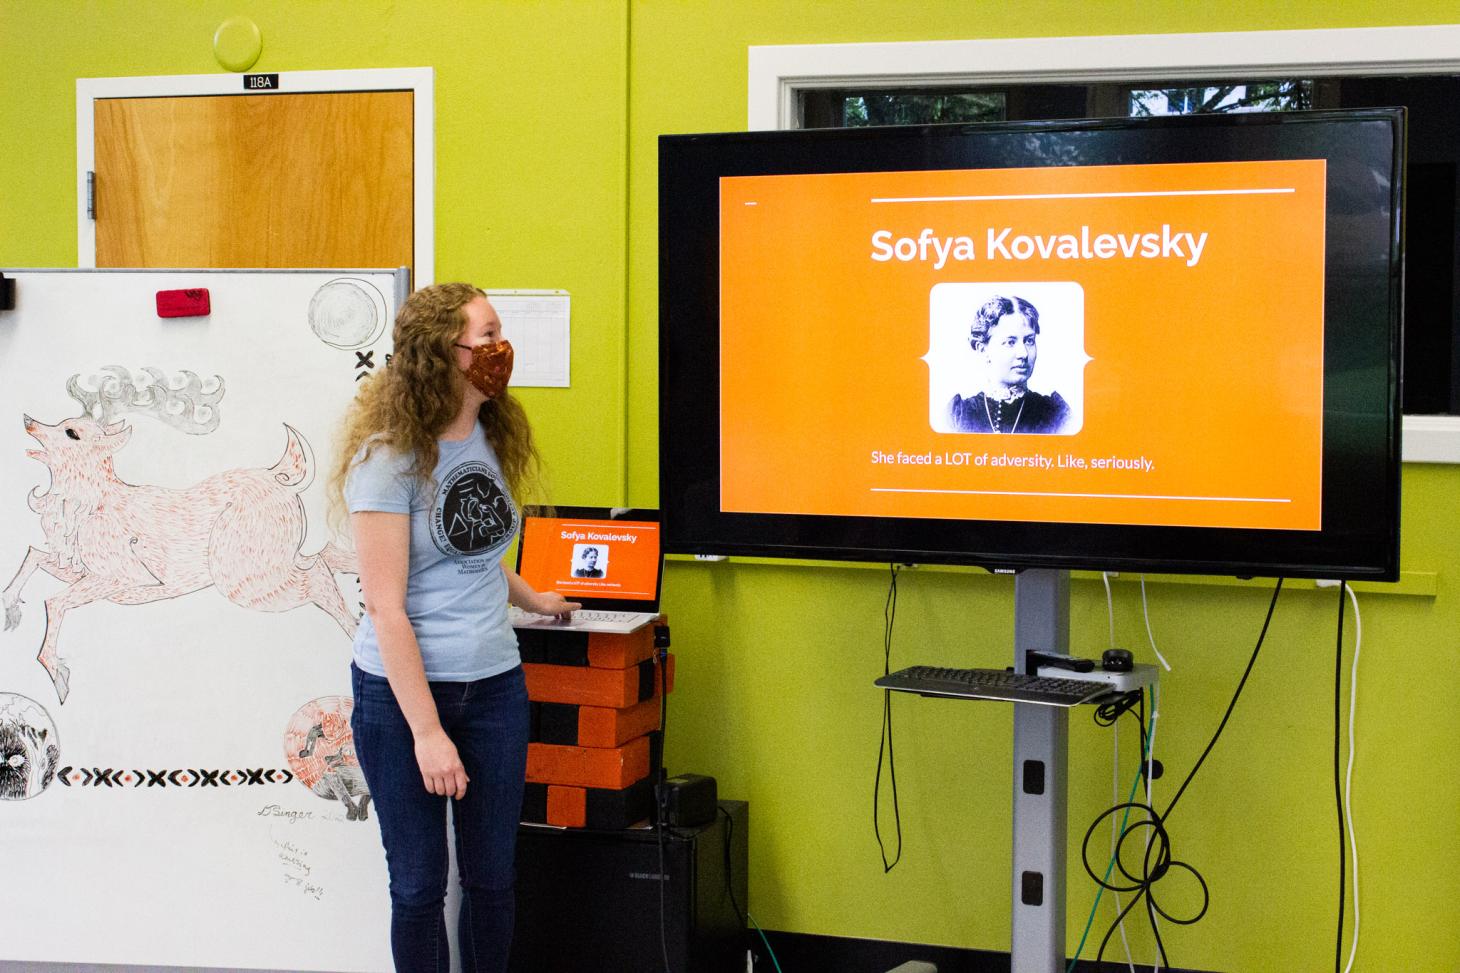 A member of the Association of Women in Mathematics presenting a powerpoint of Sofya Kovalevsky.